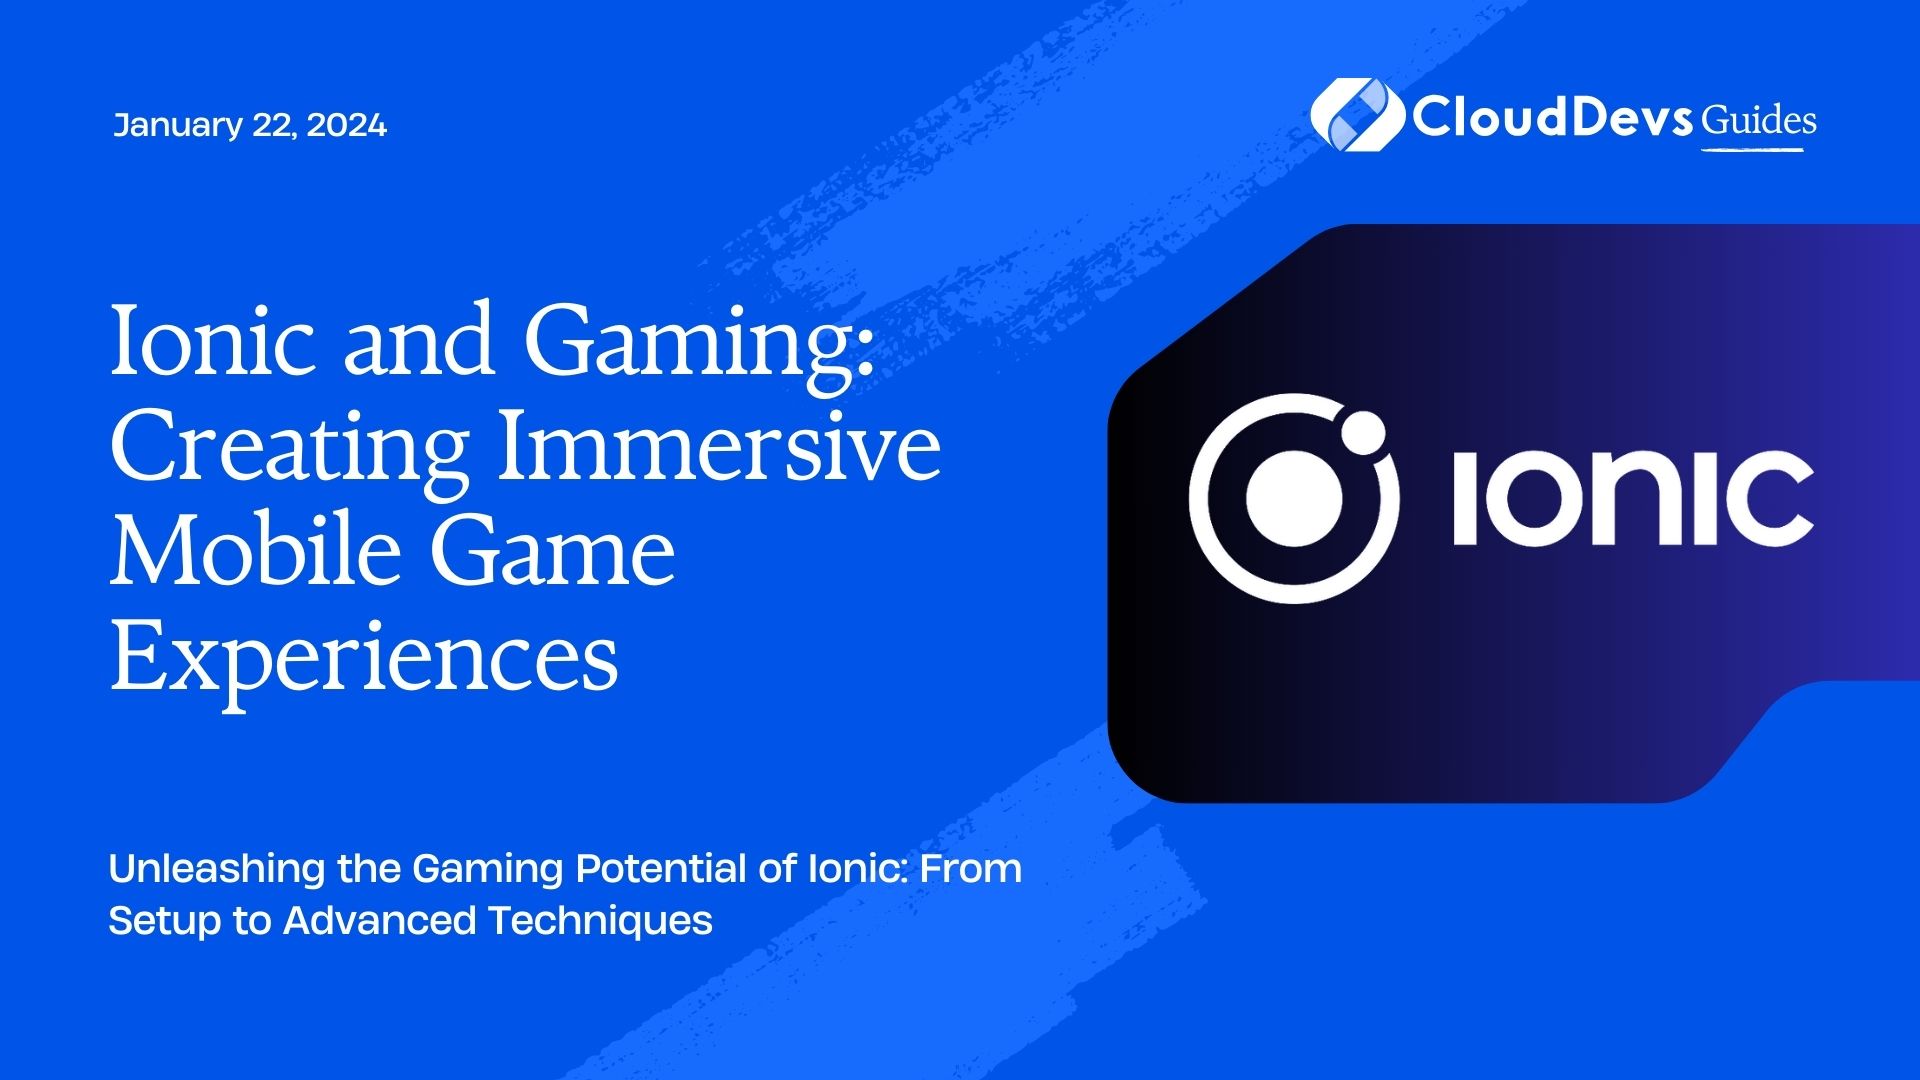 Ionic and Gaming: Creating Immersive Mobile Game Experiences